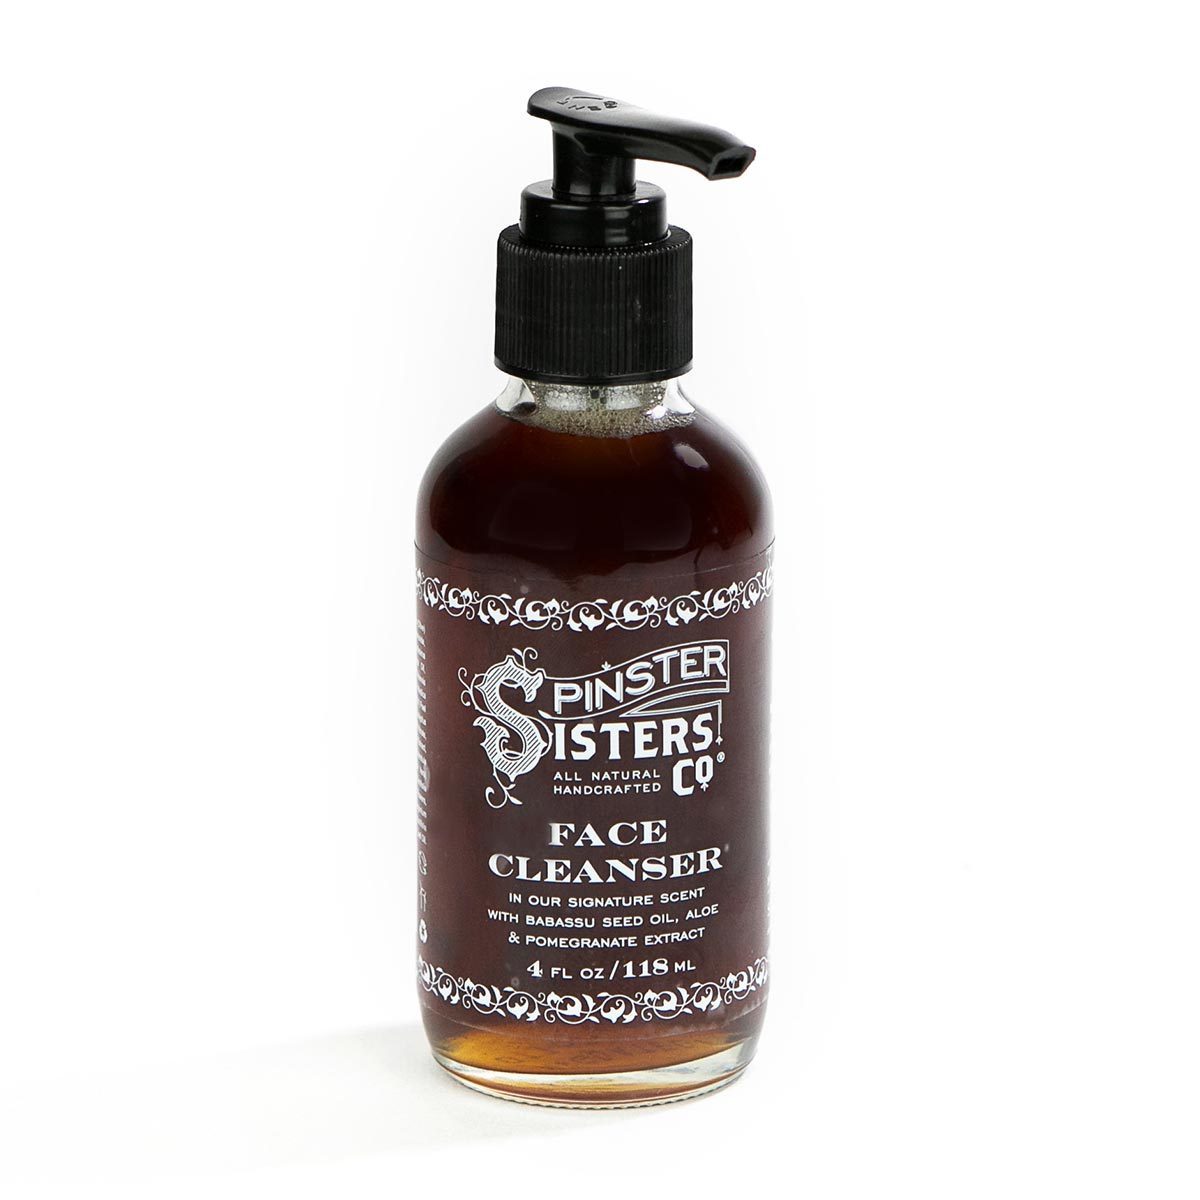 Sentence with replacements: Amber glass bottle with a black pump, labeled "Spinster Sisters Co. Spinster Sisters Face Cleanser" with ornate designs and product details, isolated on a white background.